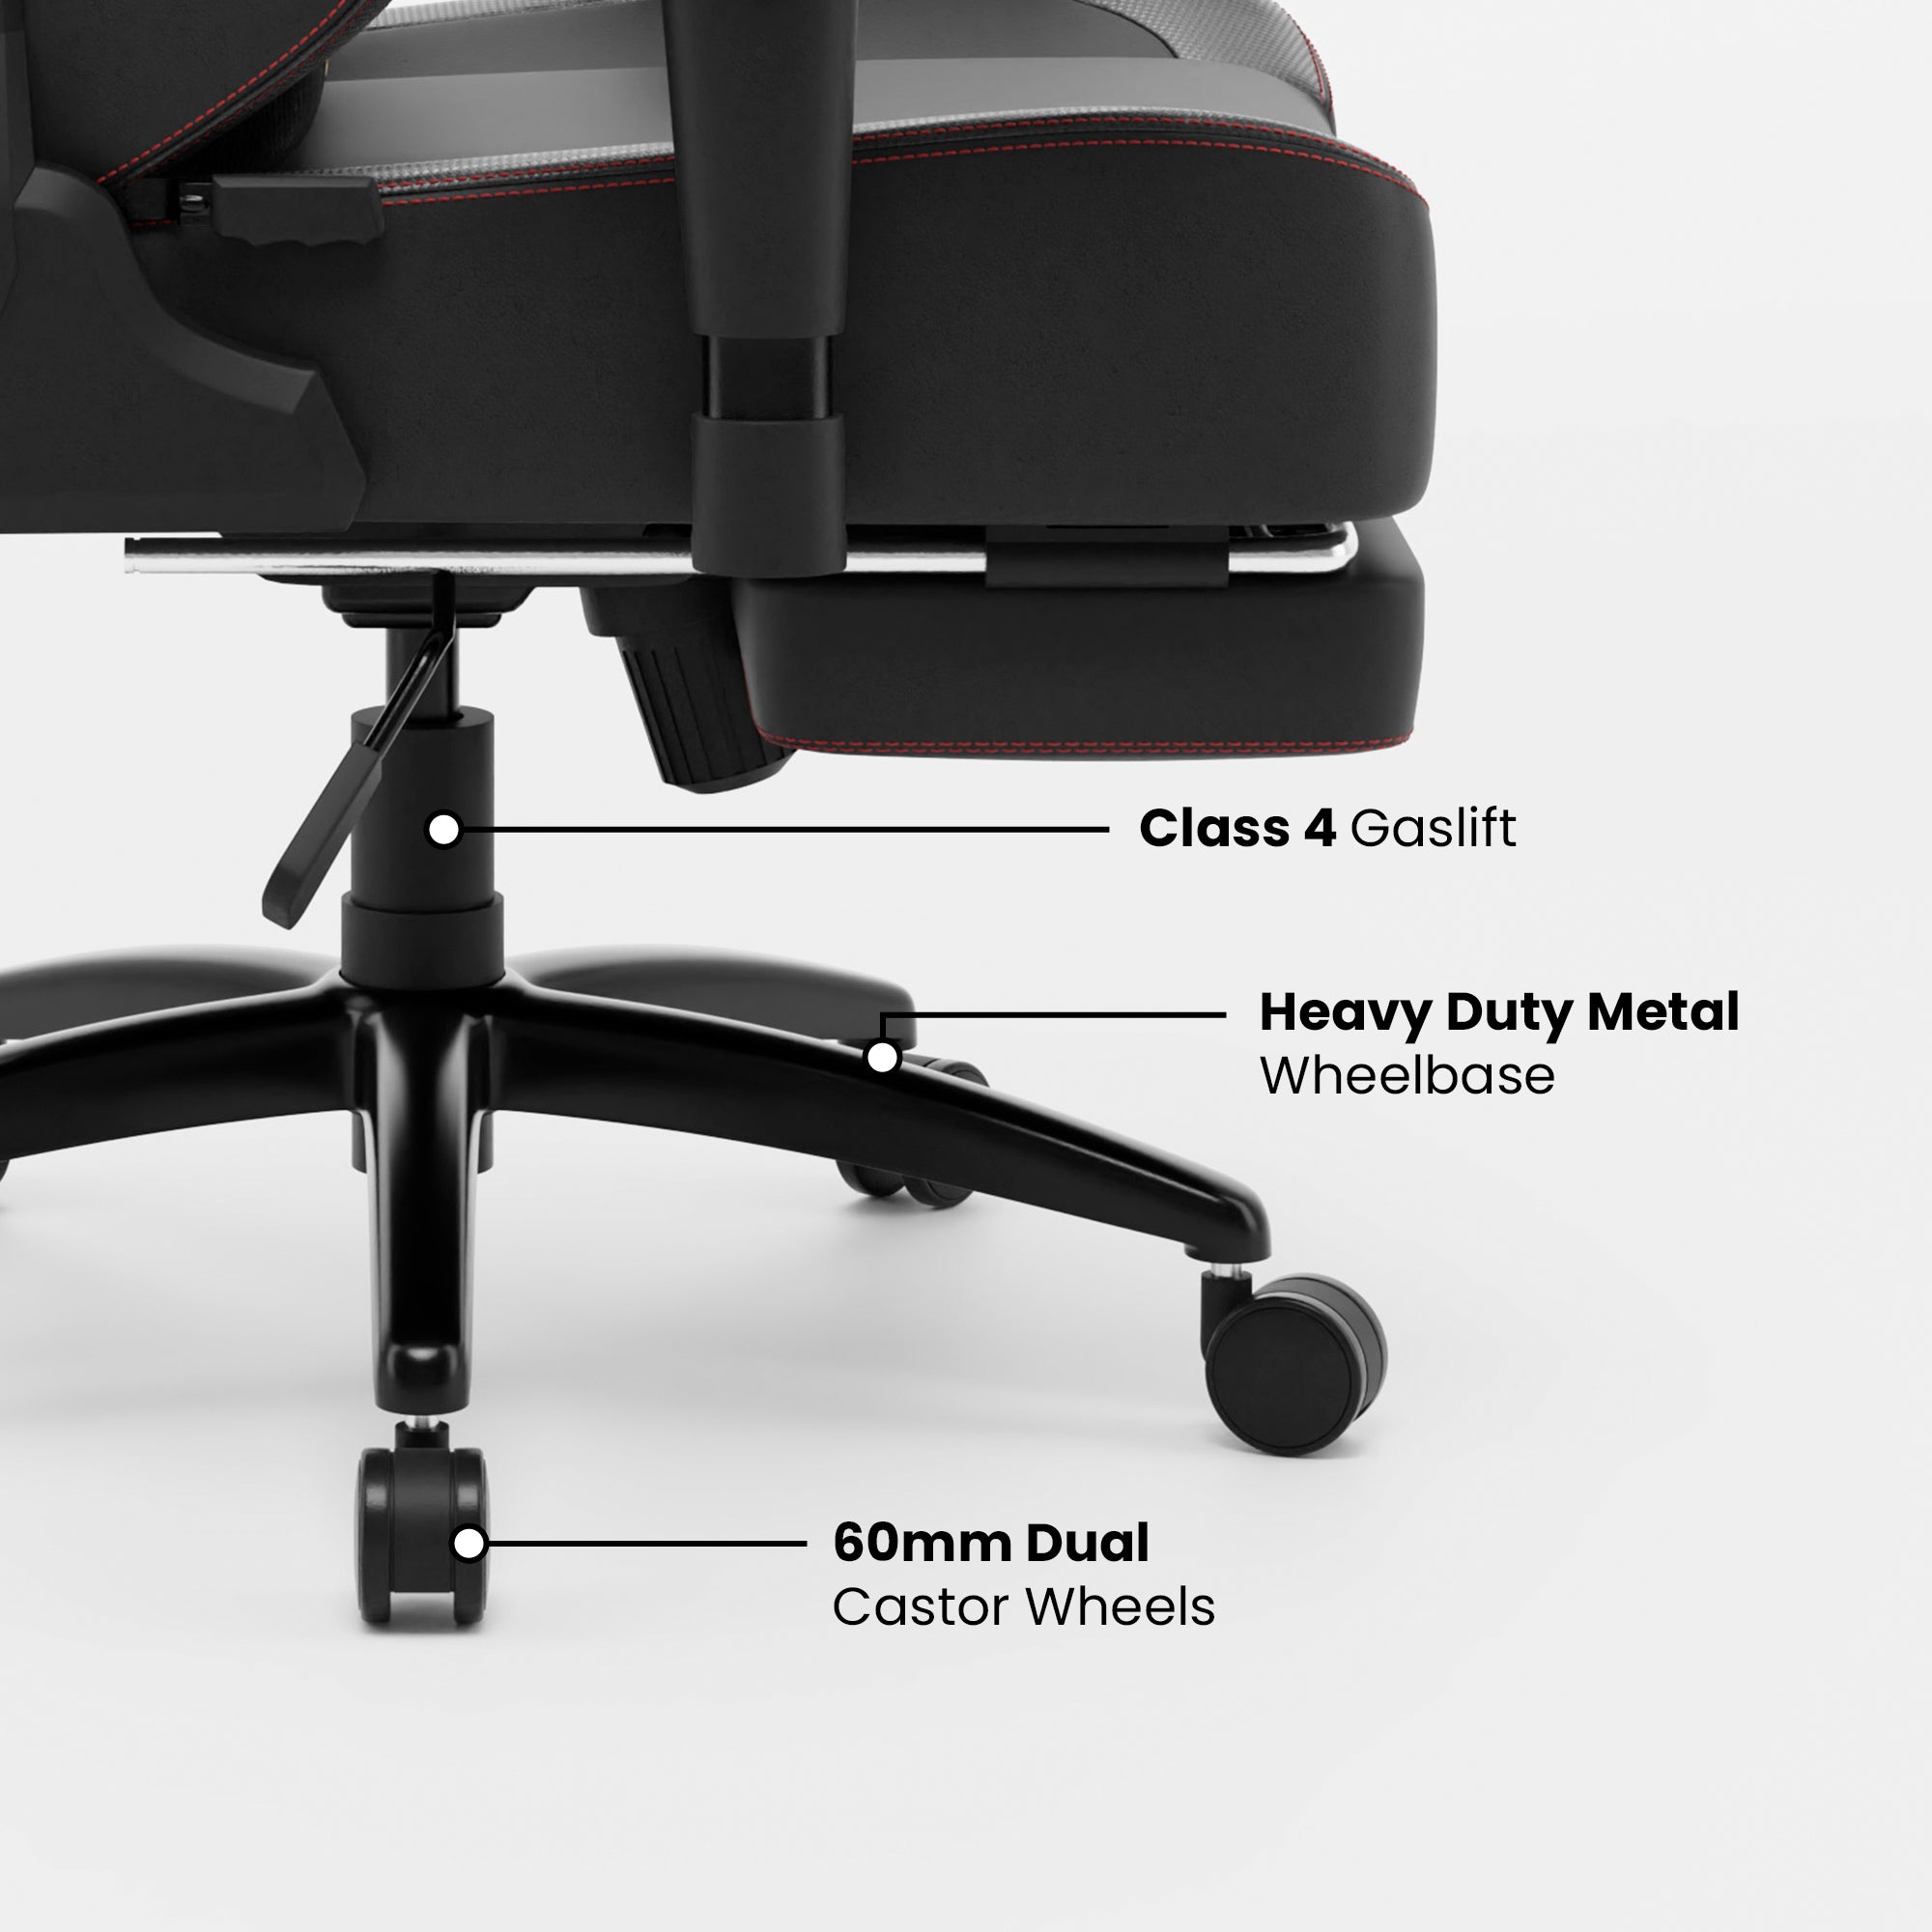 Green Soul Pro Vision Gaming Chair